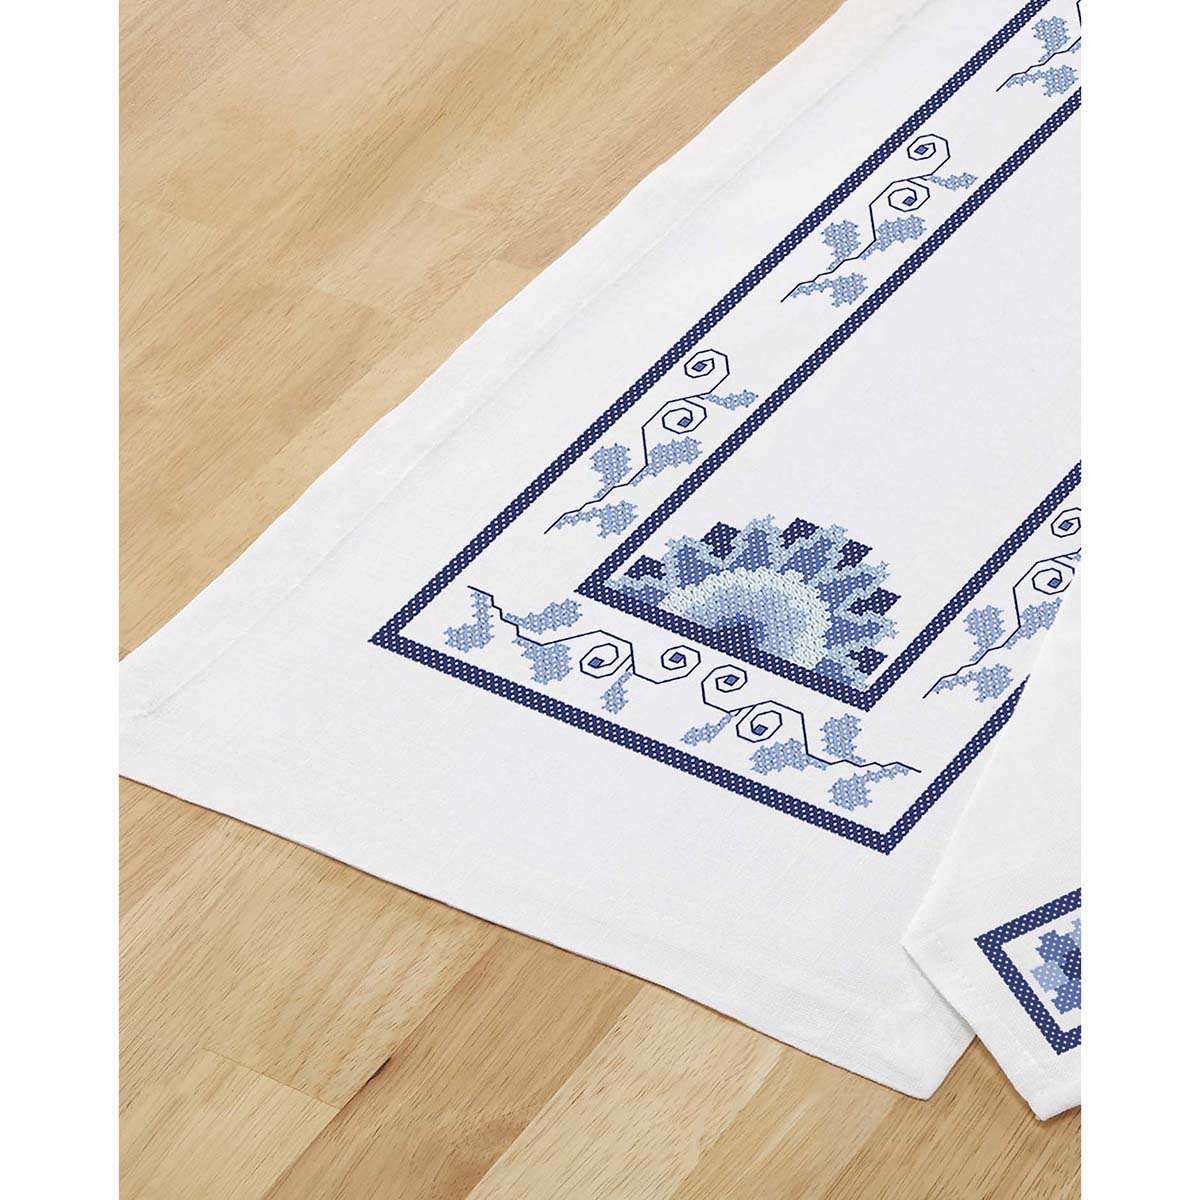 Herrschners  Blue Delft Table Runner Stamped Cross-Stitch